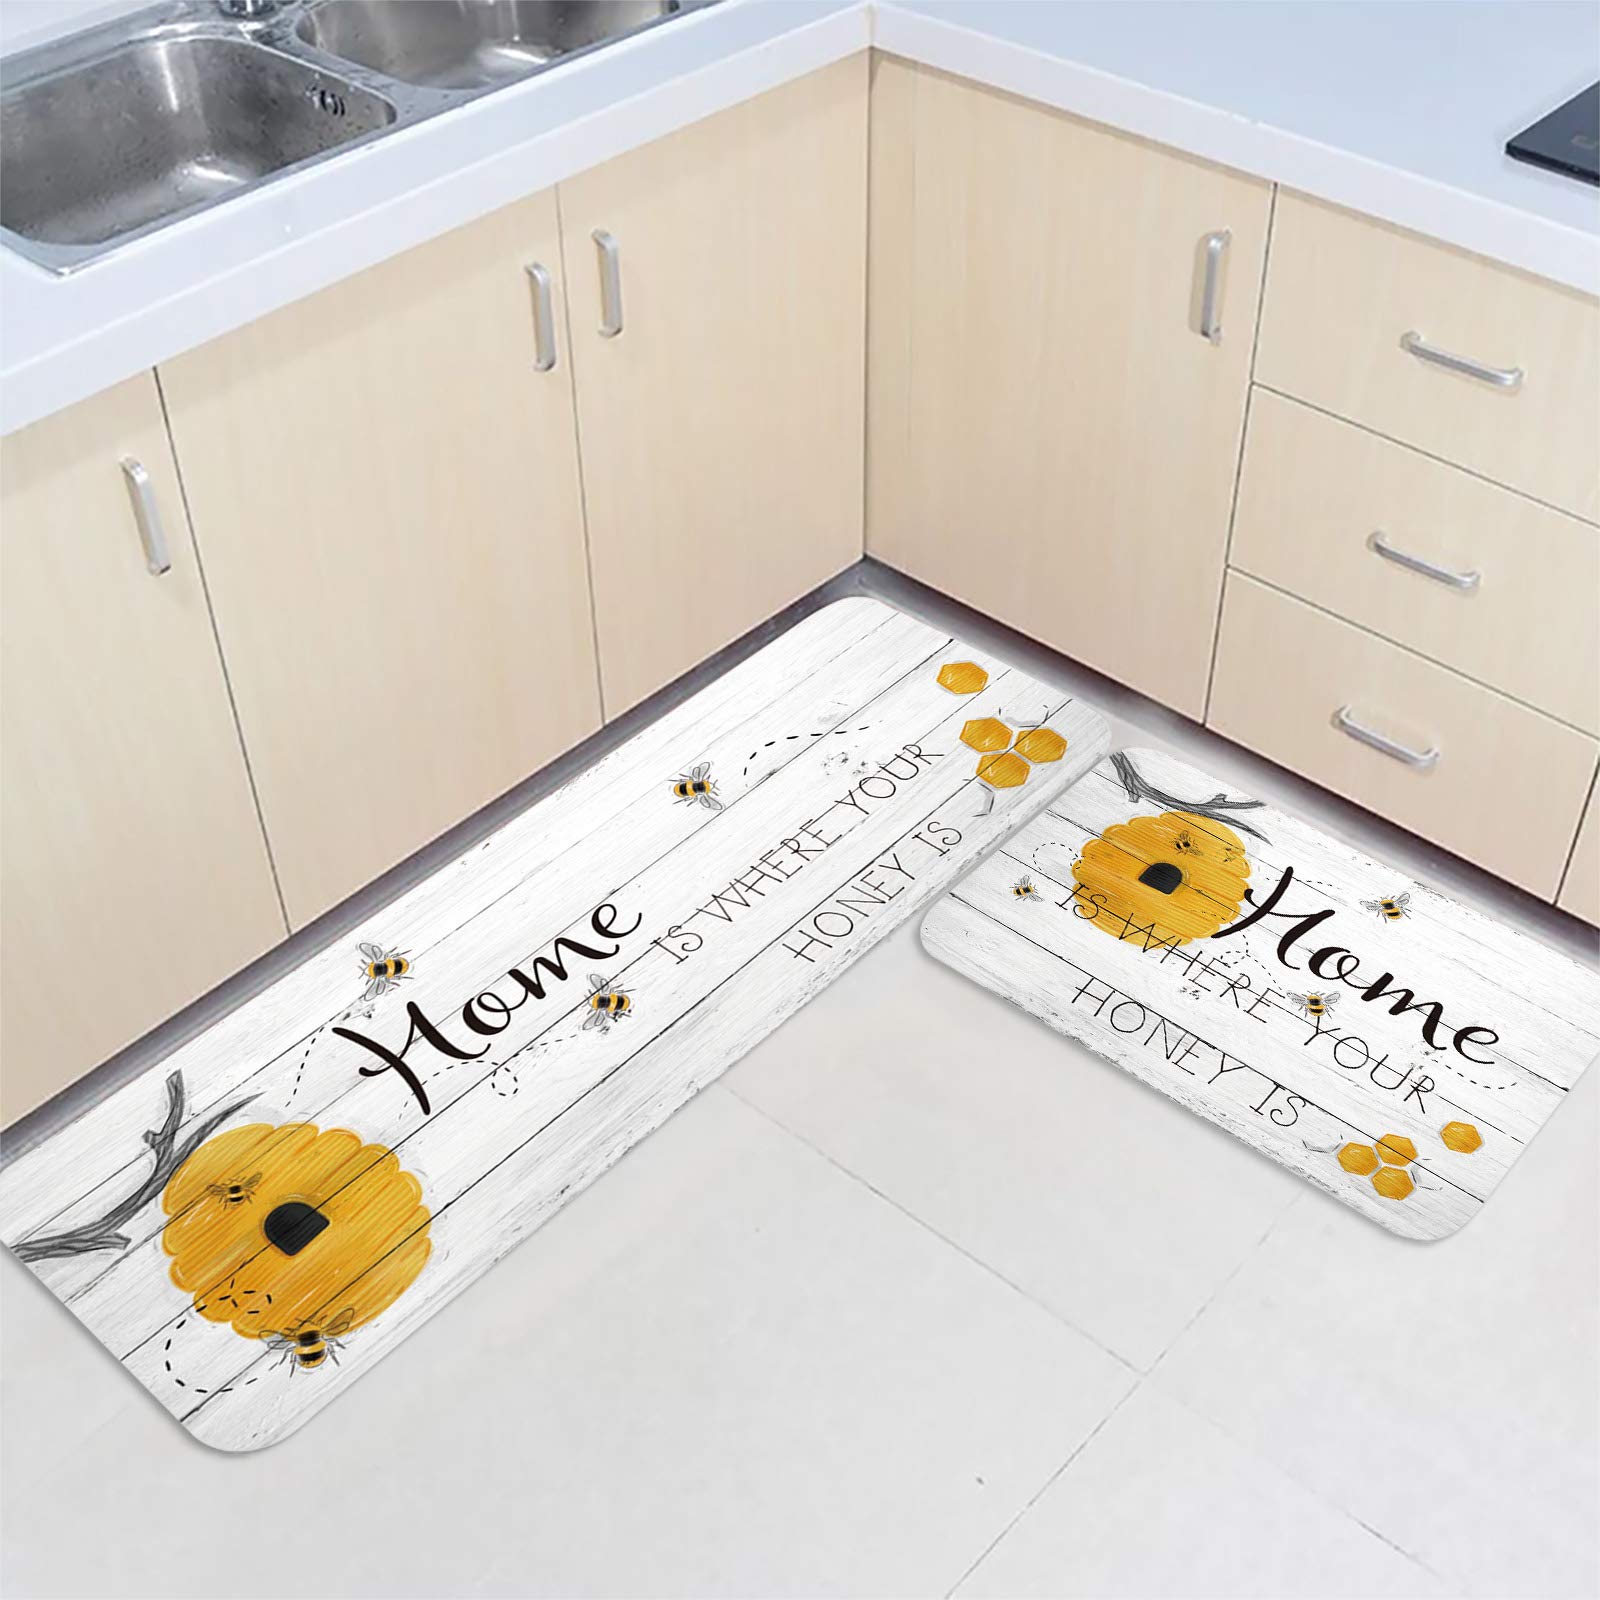 Bees Kitchen Mats 2 Pieces Non Slip Runner Rug Set Home is Where Your Honey is Bee Home Hive Rustic Wood Grain Kitchen Rugs Washable Comfort Floor Mat for Kitchen,Sink,Office,15.7"x23.6"+15.7"x47.2"